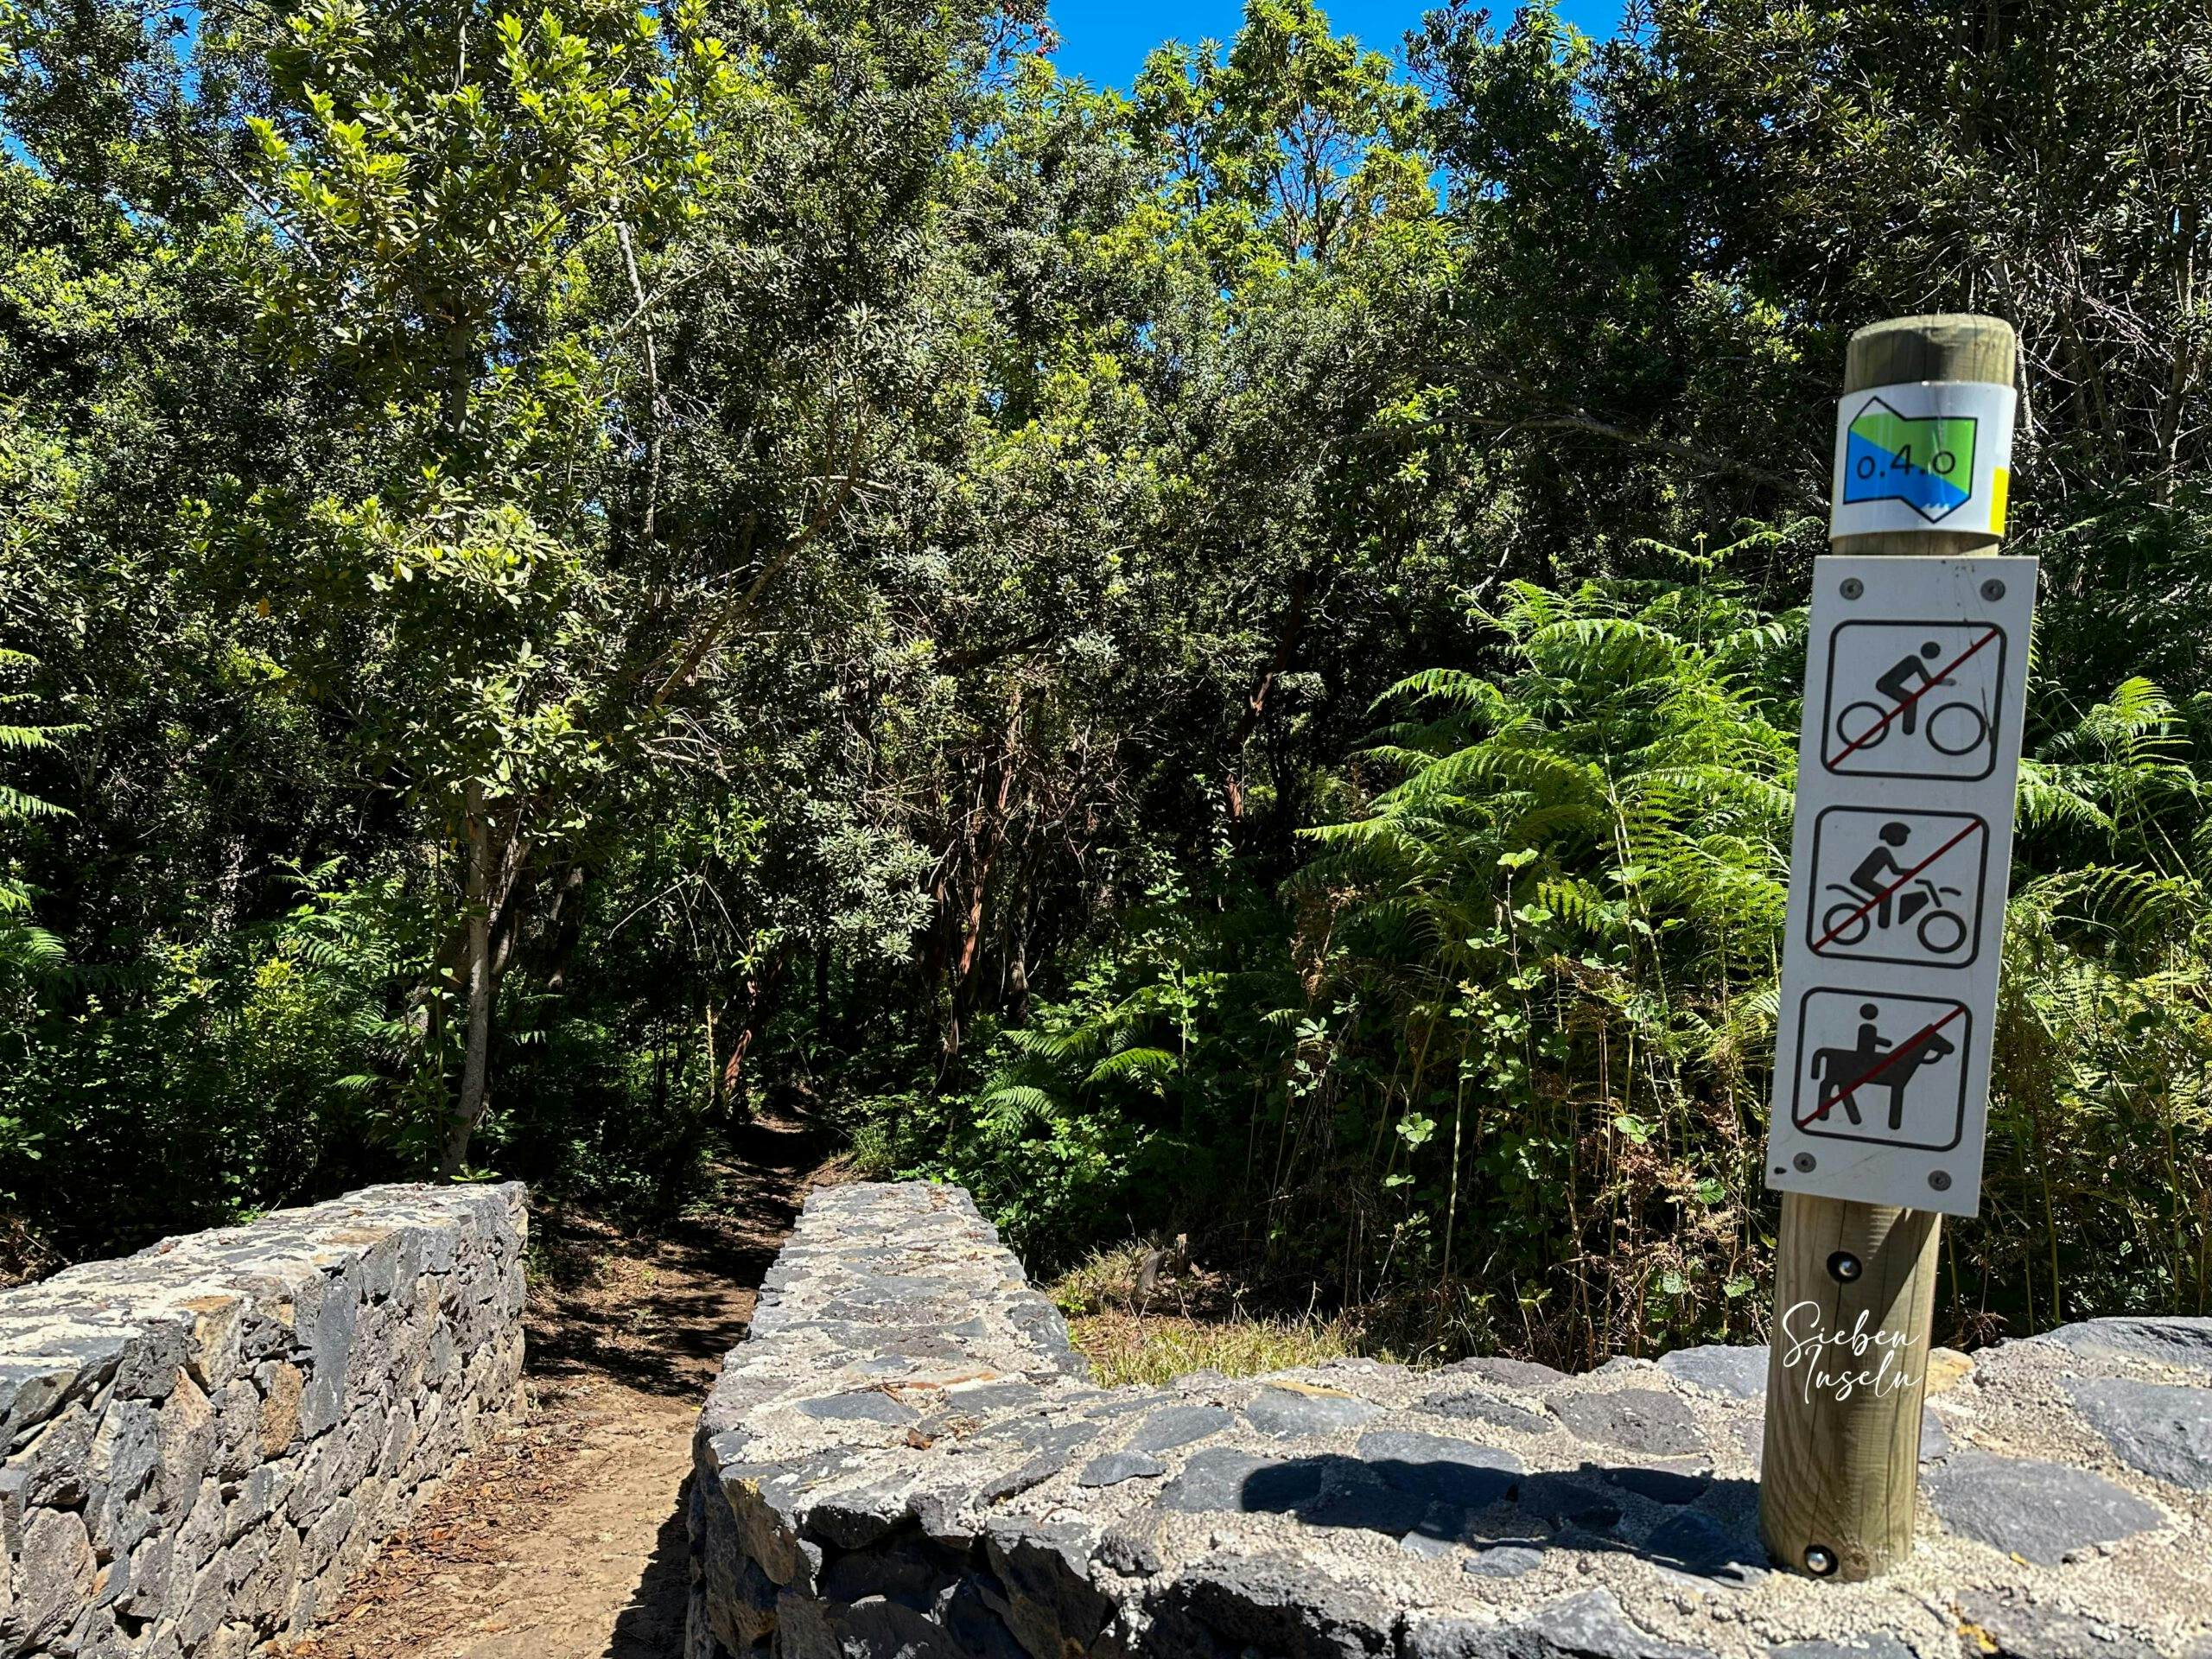 The hiking trail leads onto trail 0.4.0, which leads from El Socorro beach to the Teide.